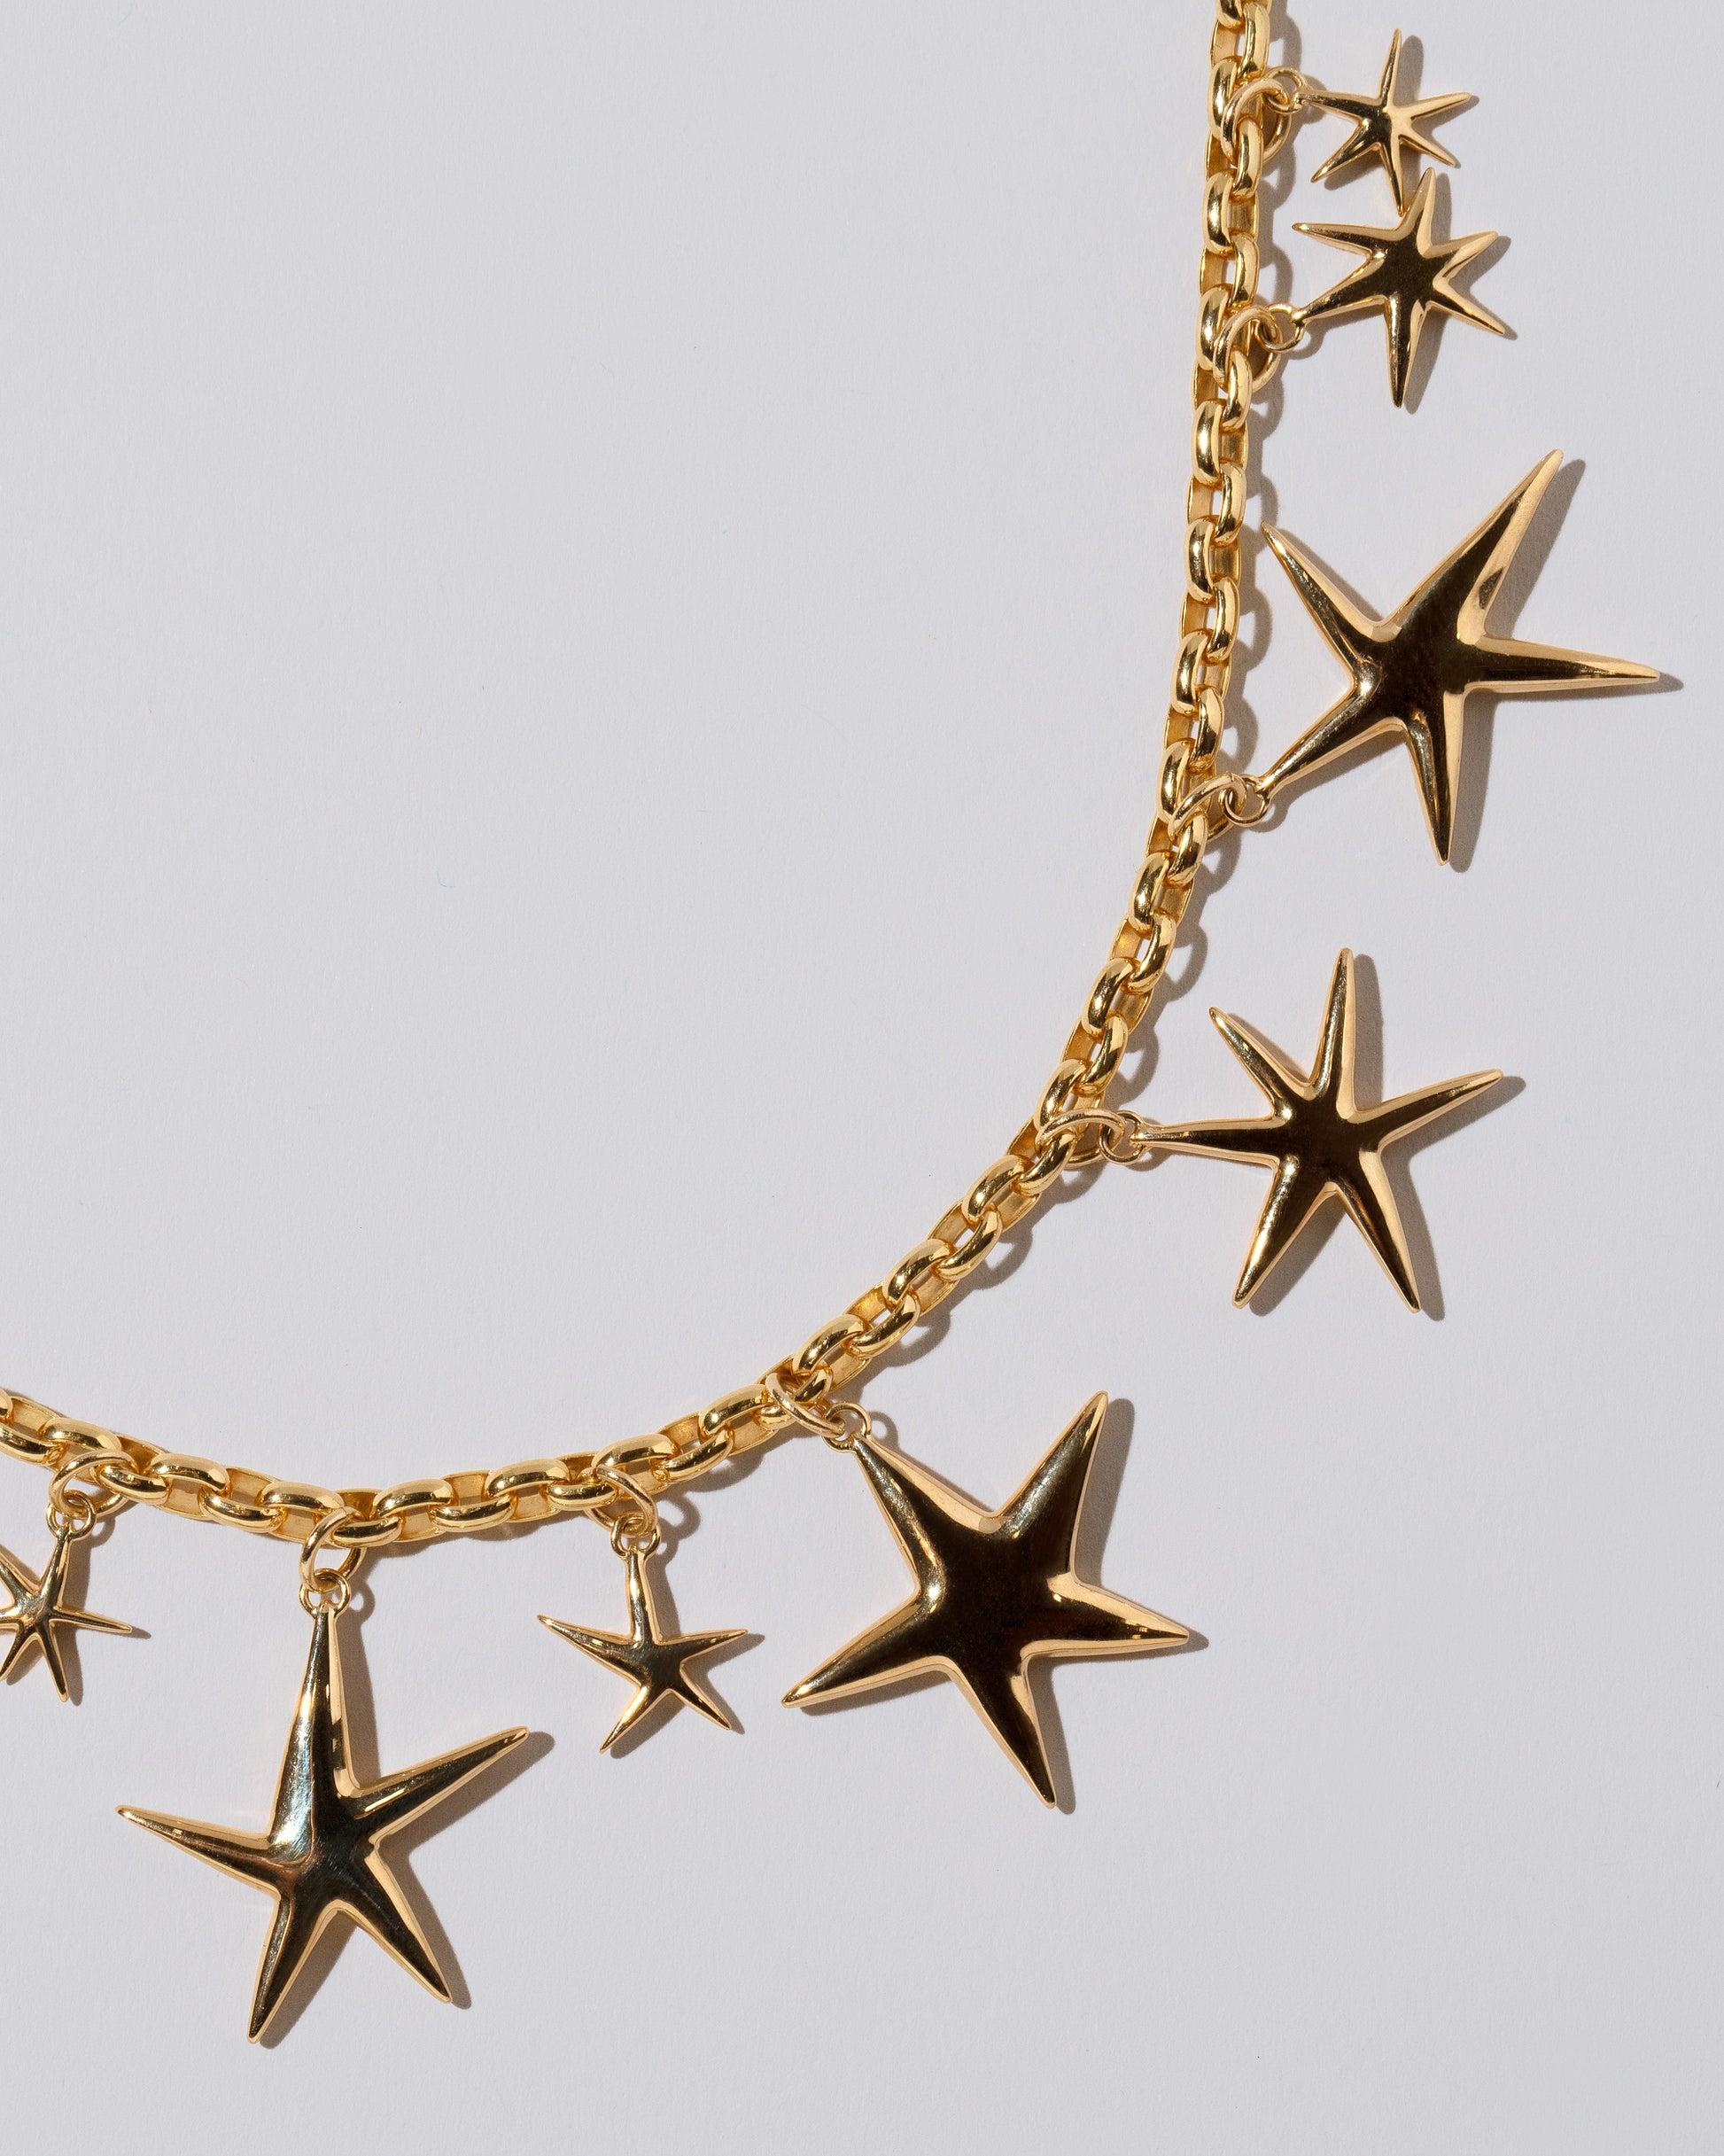 Product photo of Verve Star Necklace on a light color background